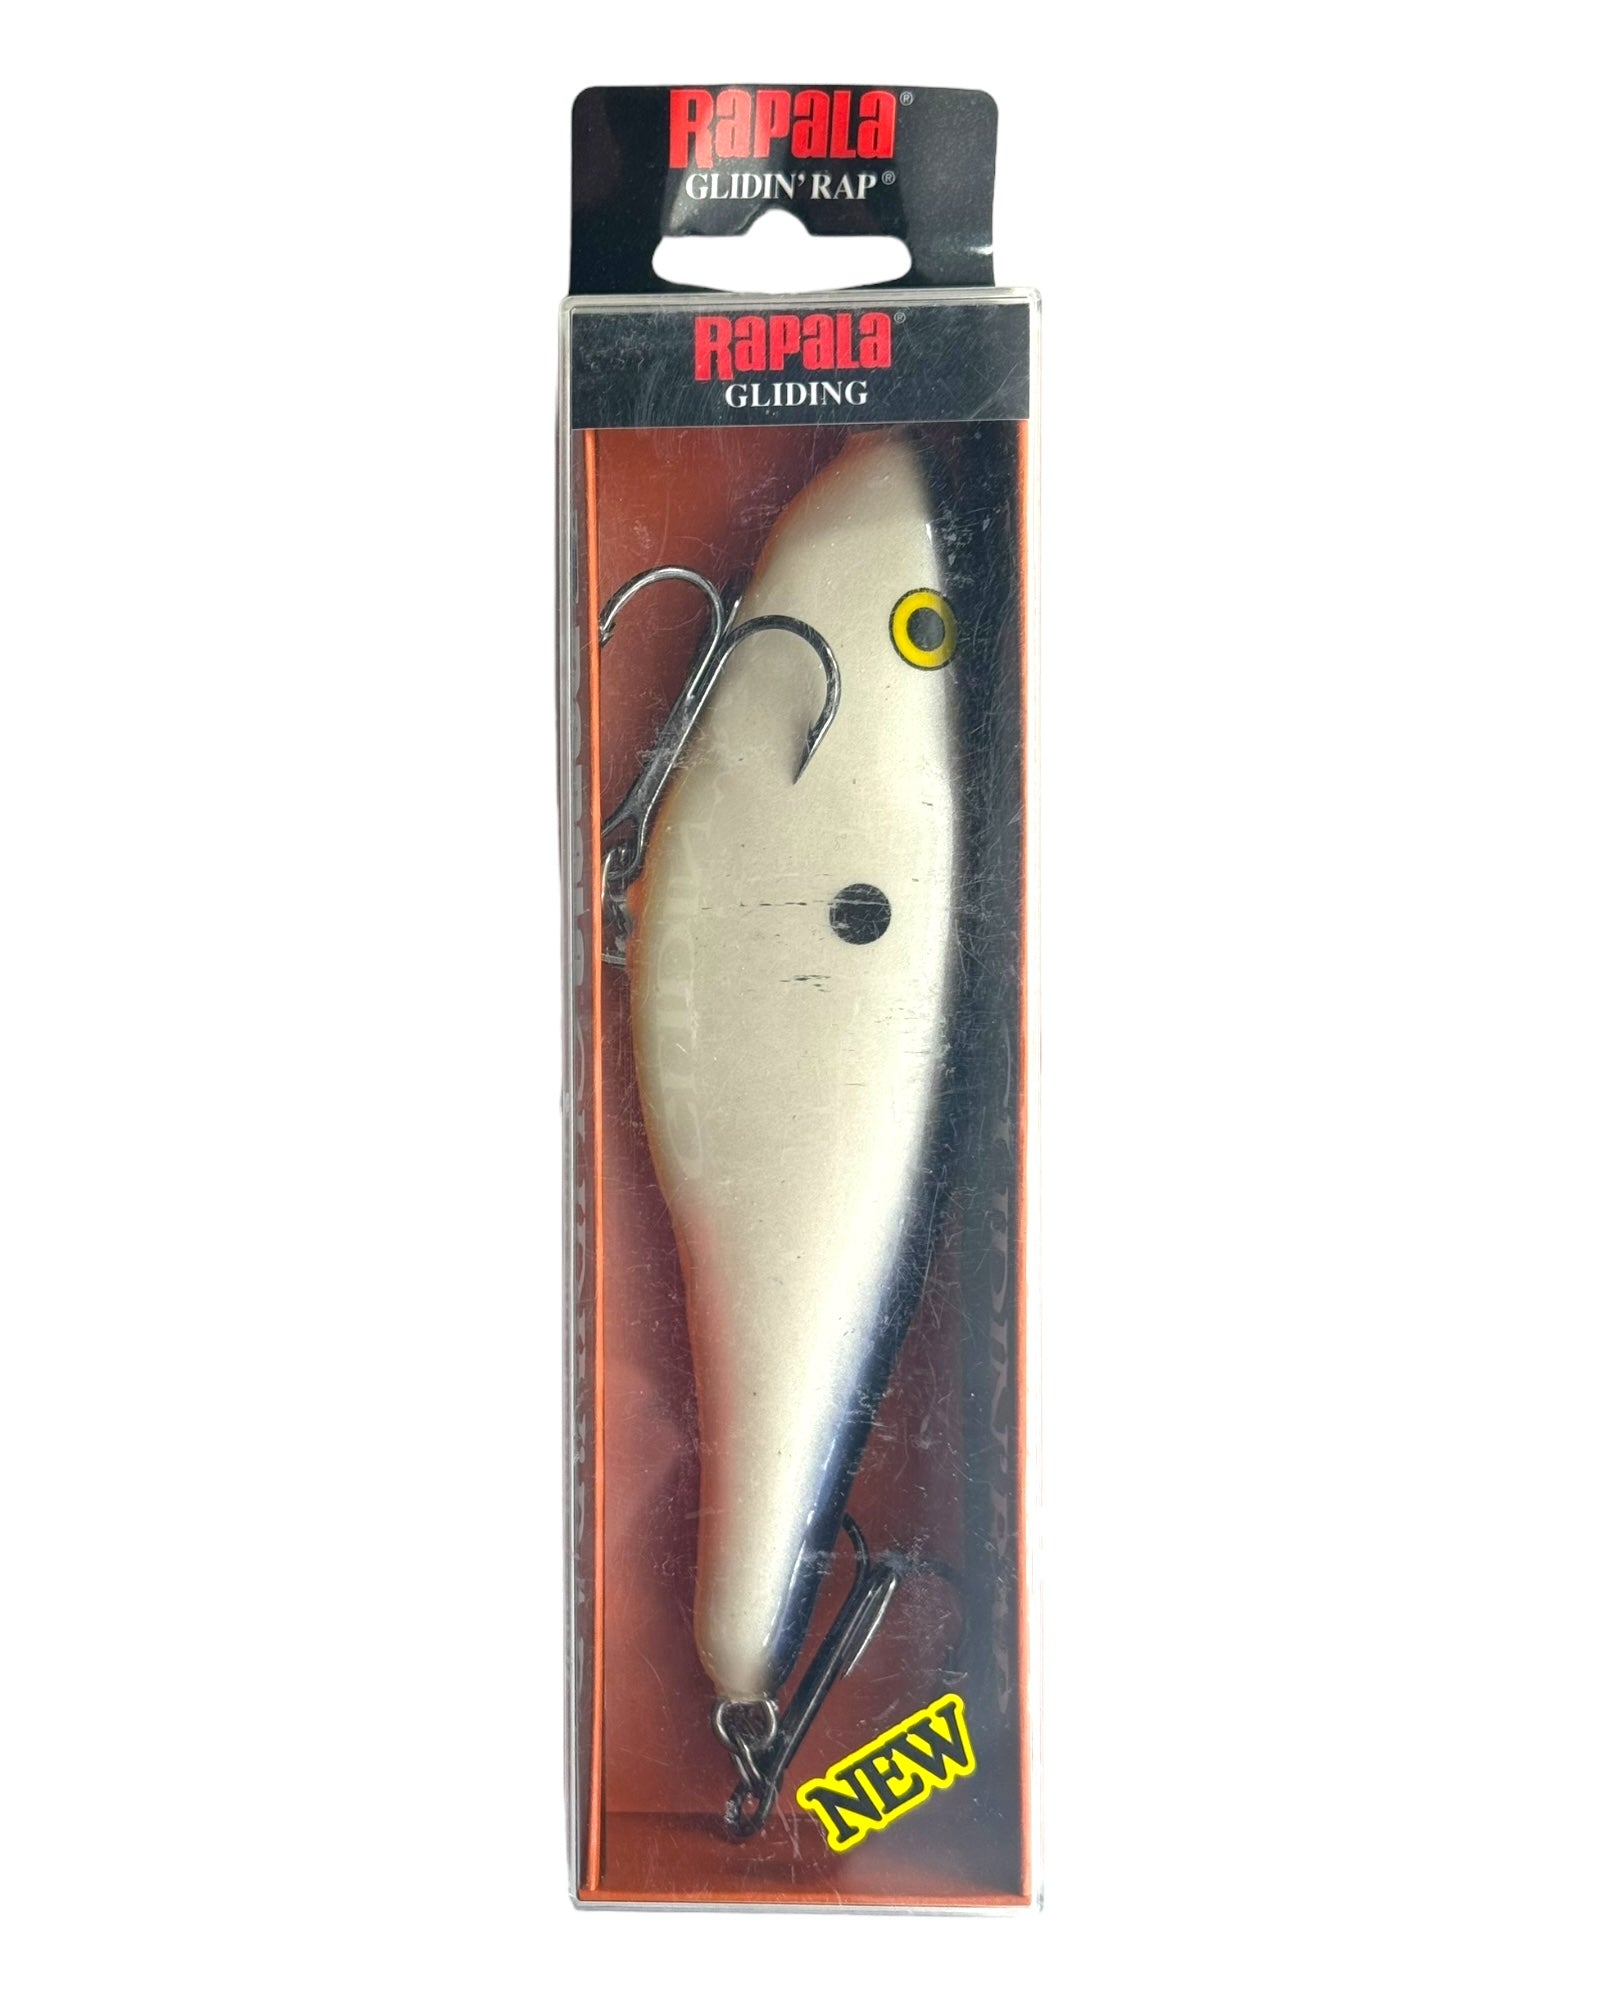 RAPALA LURES GLIDIN' RAP 15 Fishing Lure • OPSD PEARL SHAD – Toad